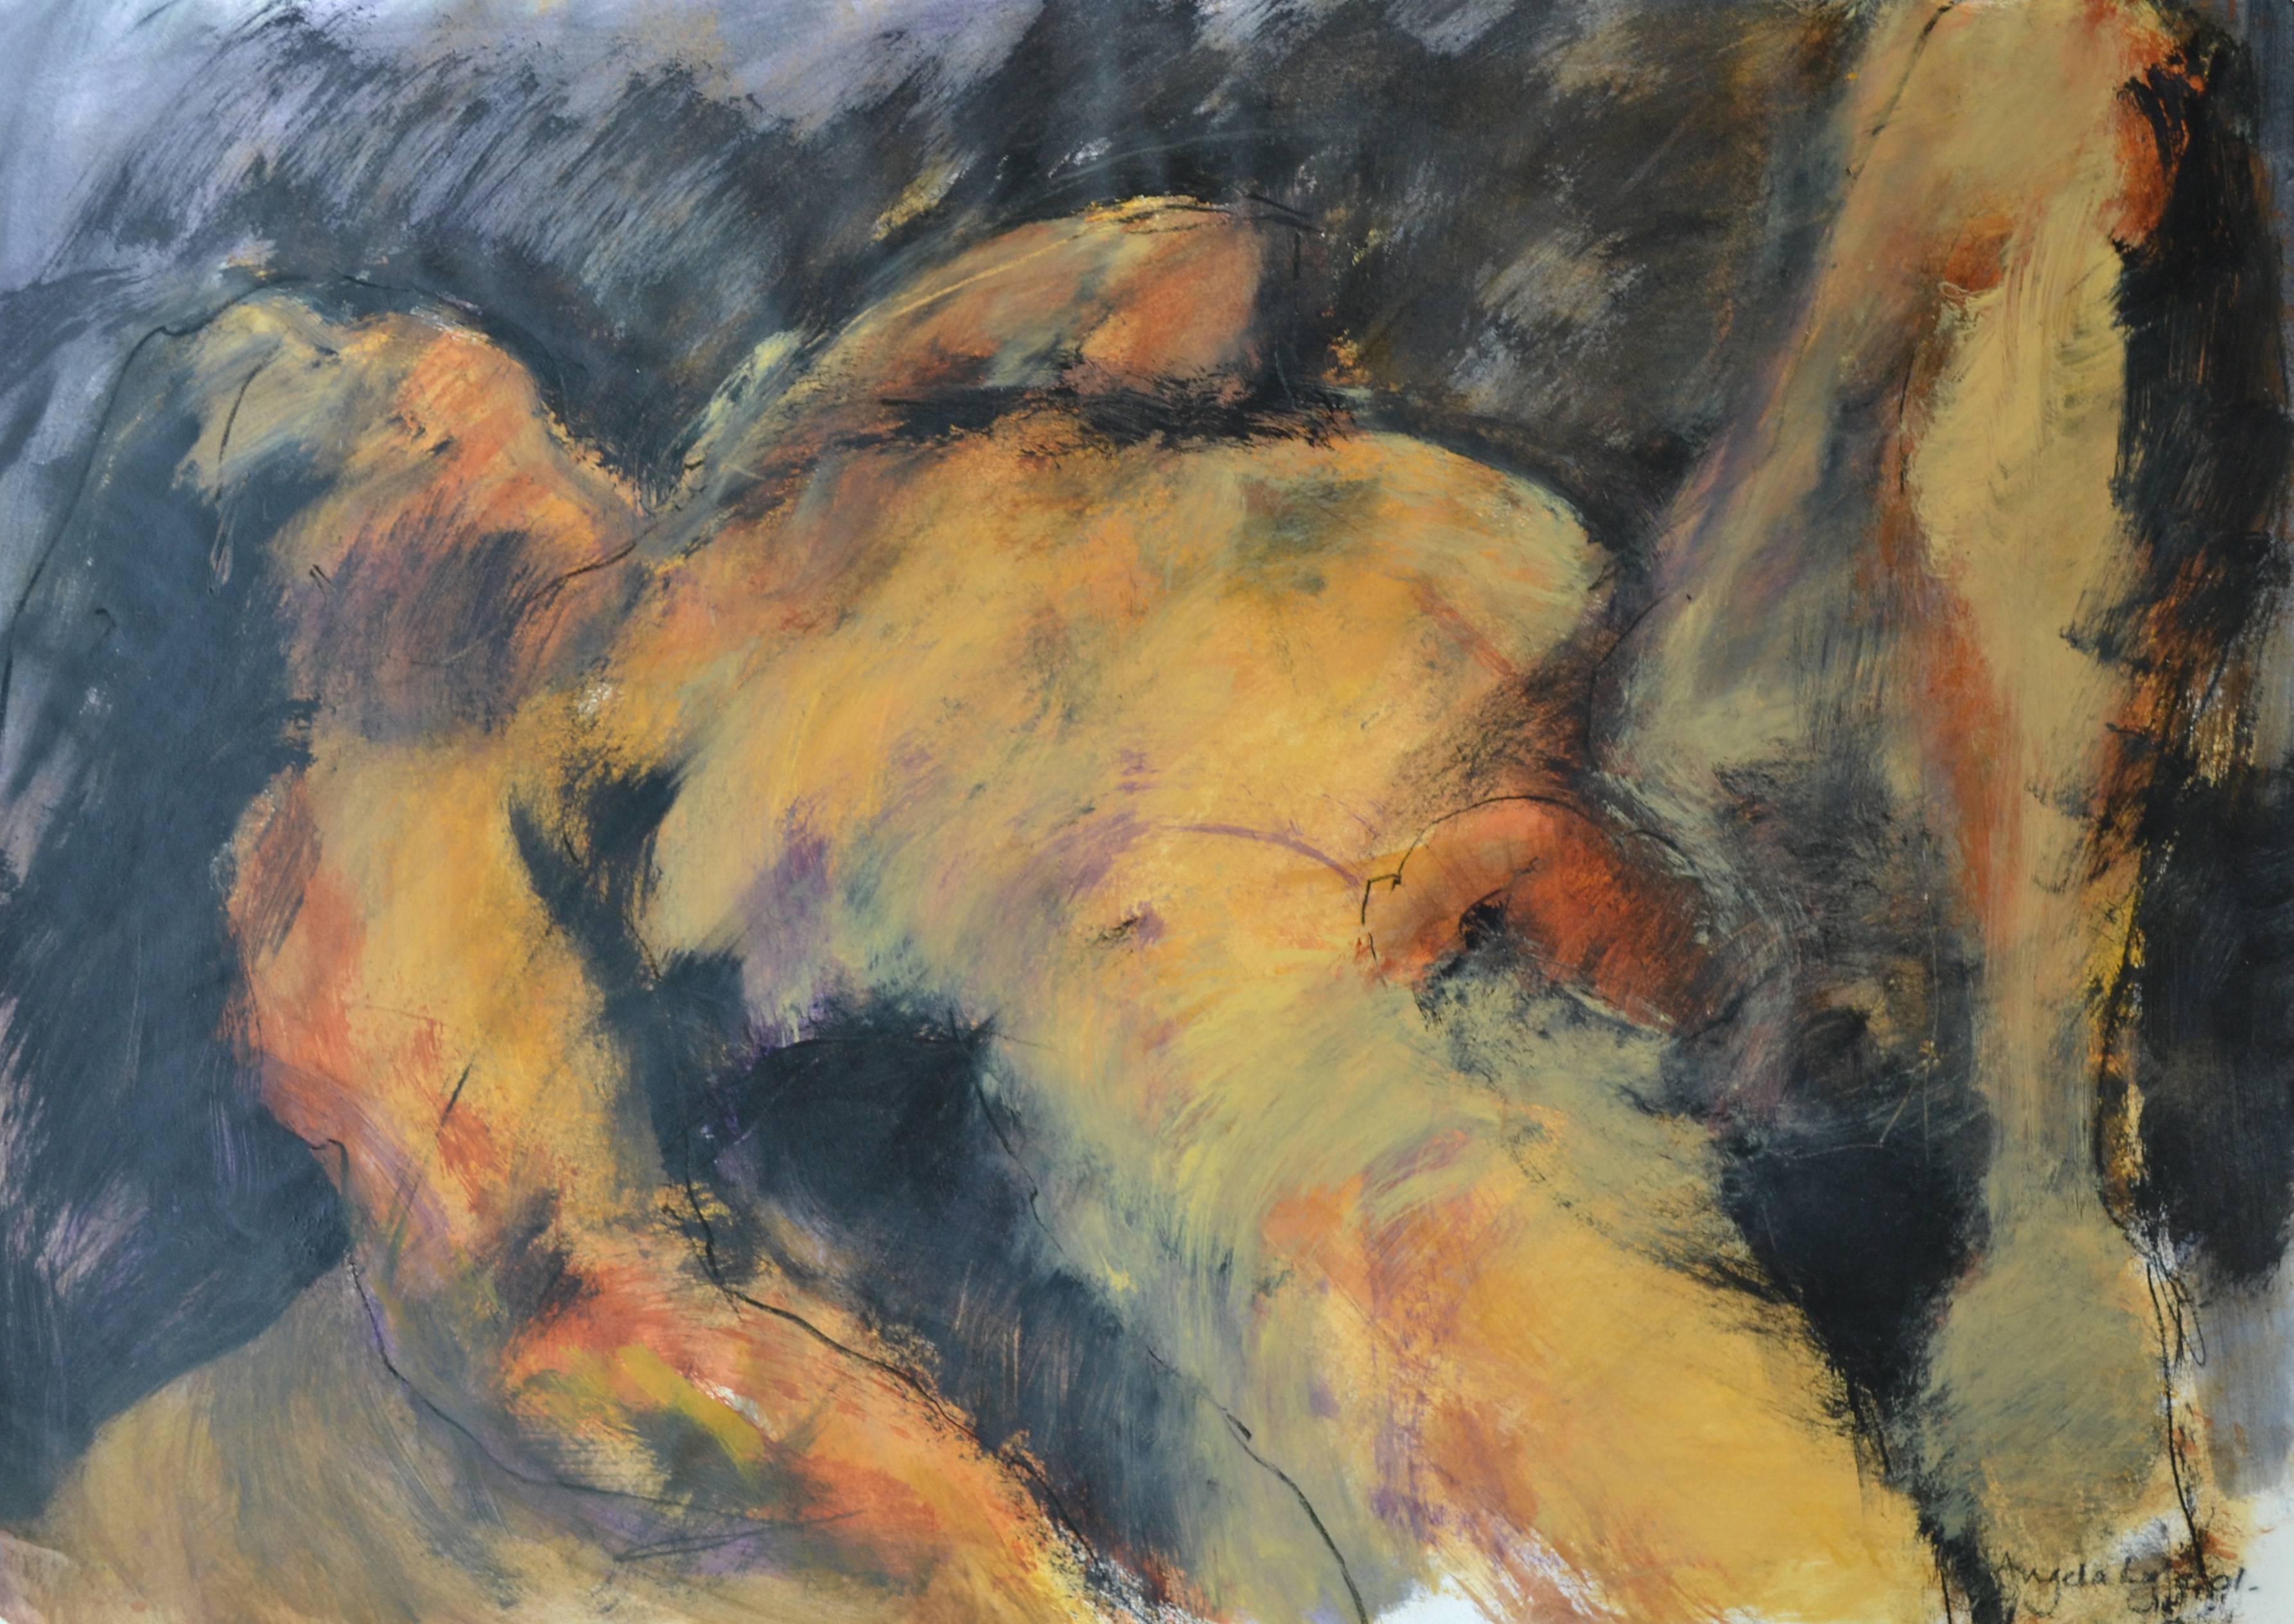 Angela Lyle Nude Painting - Reclined Pose: Mixed media painting on paper